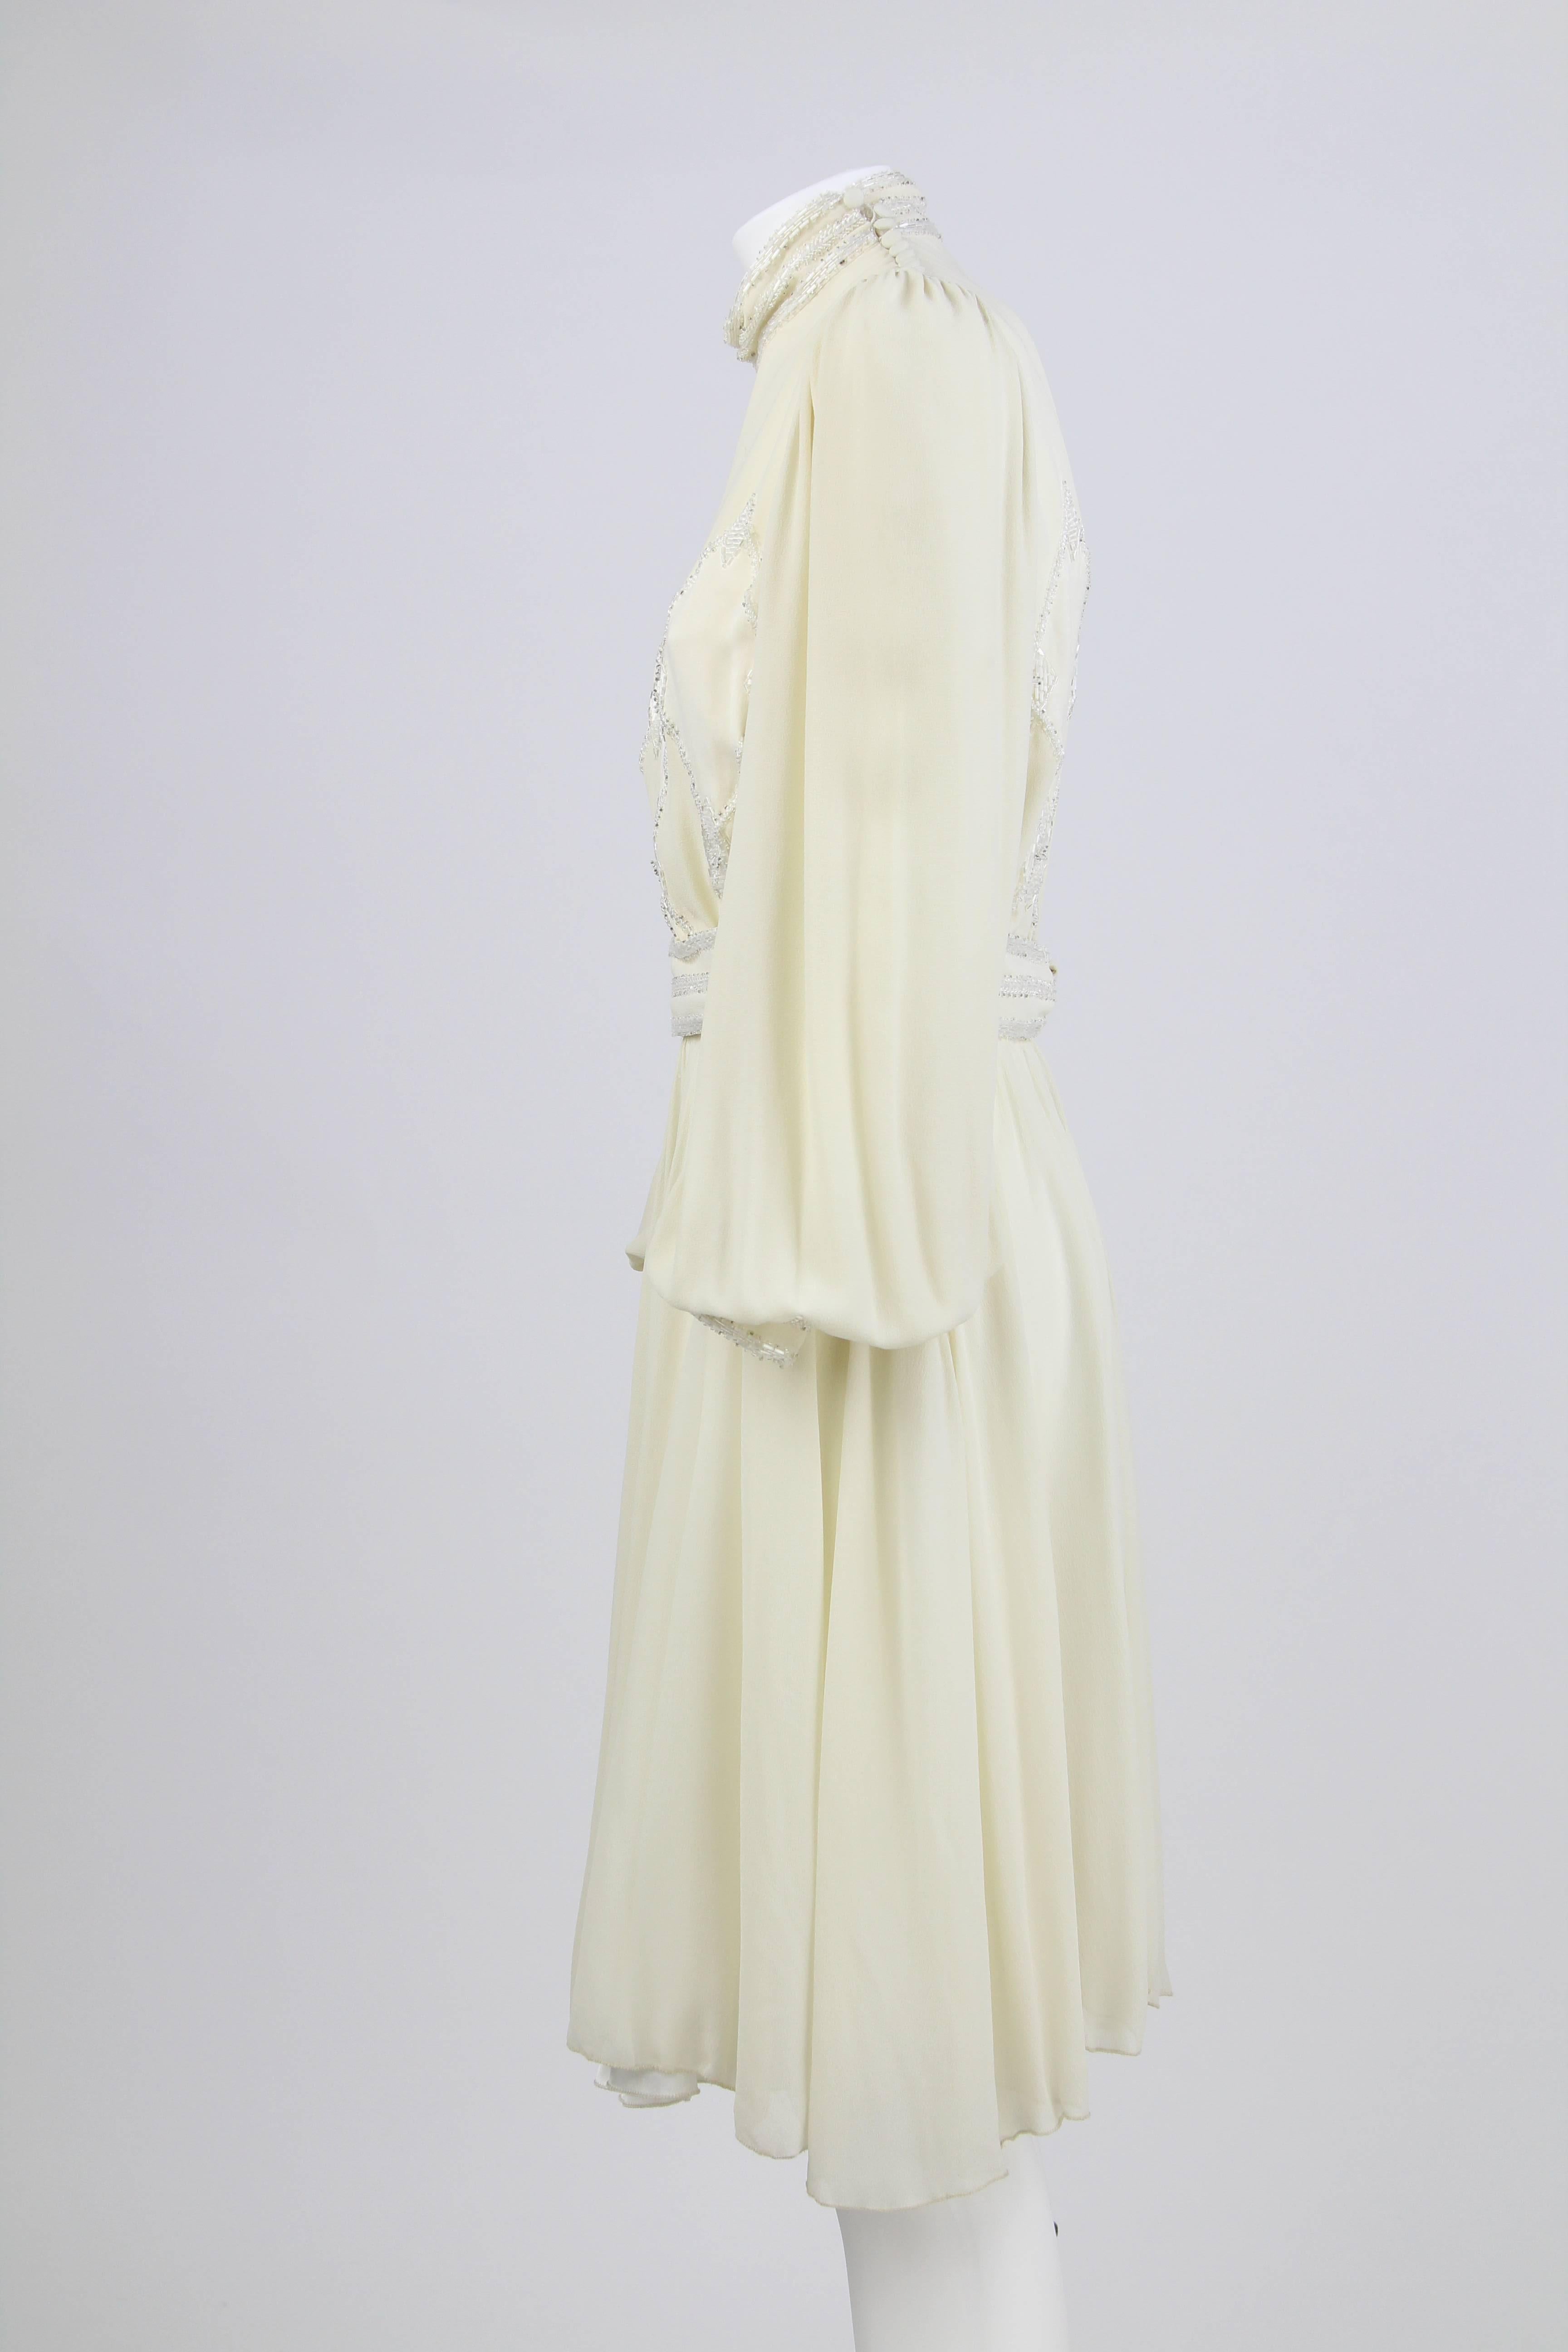 Charming cream white silk long sleeved dress made by Leggenda made in Italy. It features pearly white beads decorations on the bodice, the collar, the cuffs and the removable waistband.  The dress has a petticoat. There's a zip on the left side and